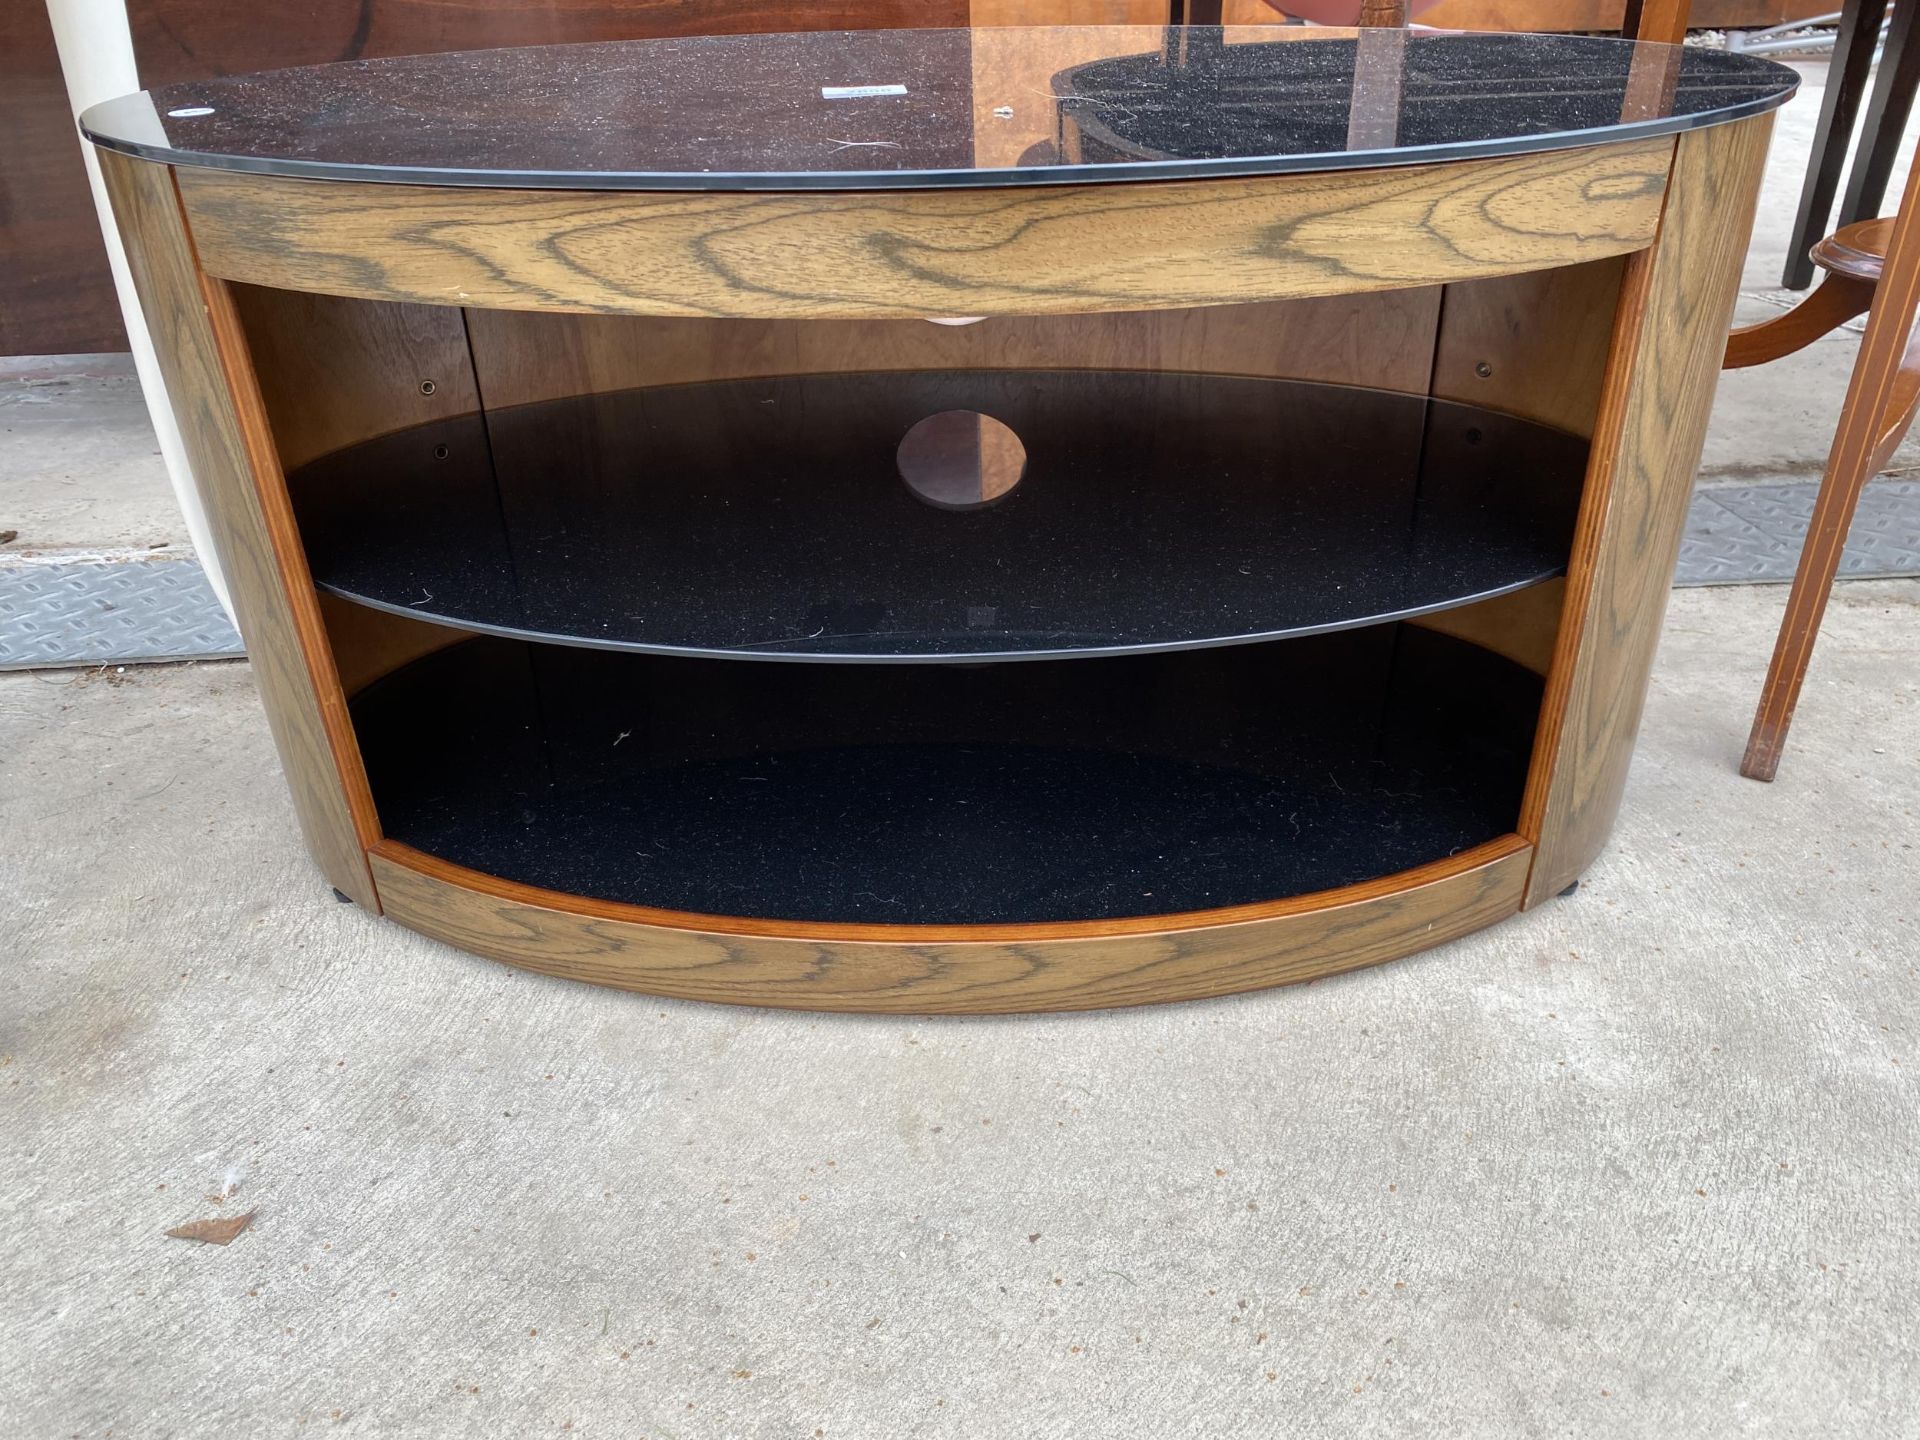 A MODERN OVAL TV STAND WITH THREE TIER GLASS SHELVES - Image 2 of 2